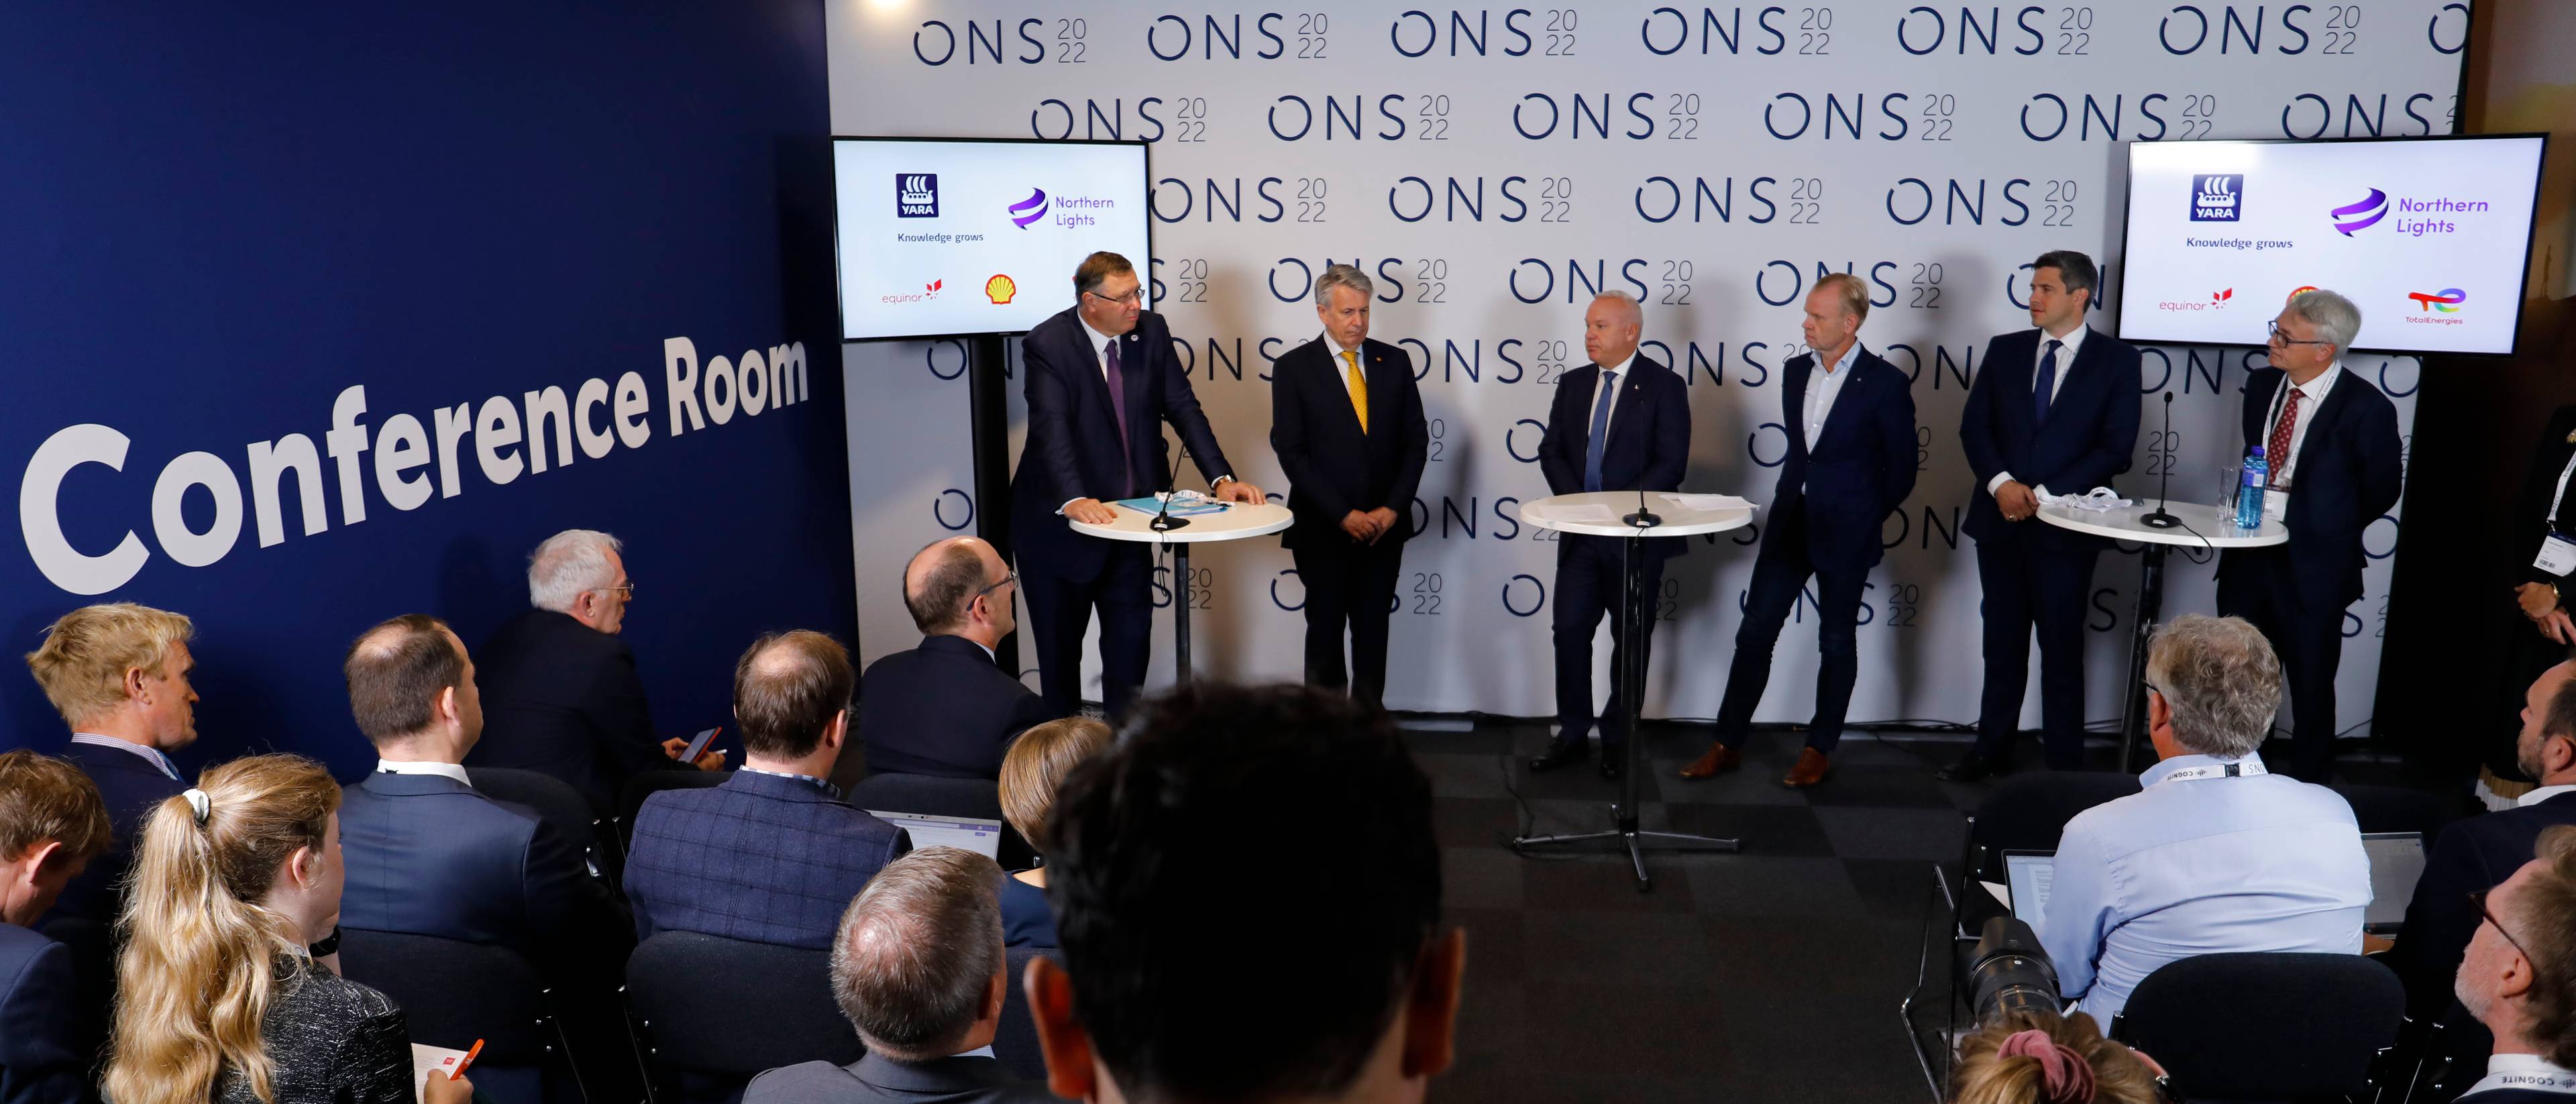 From the press conference held at ONS